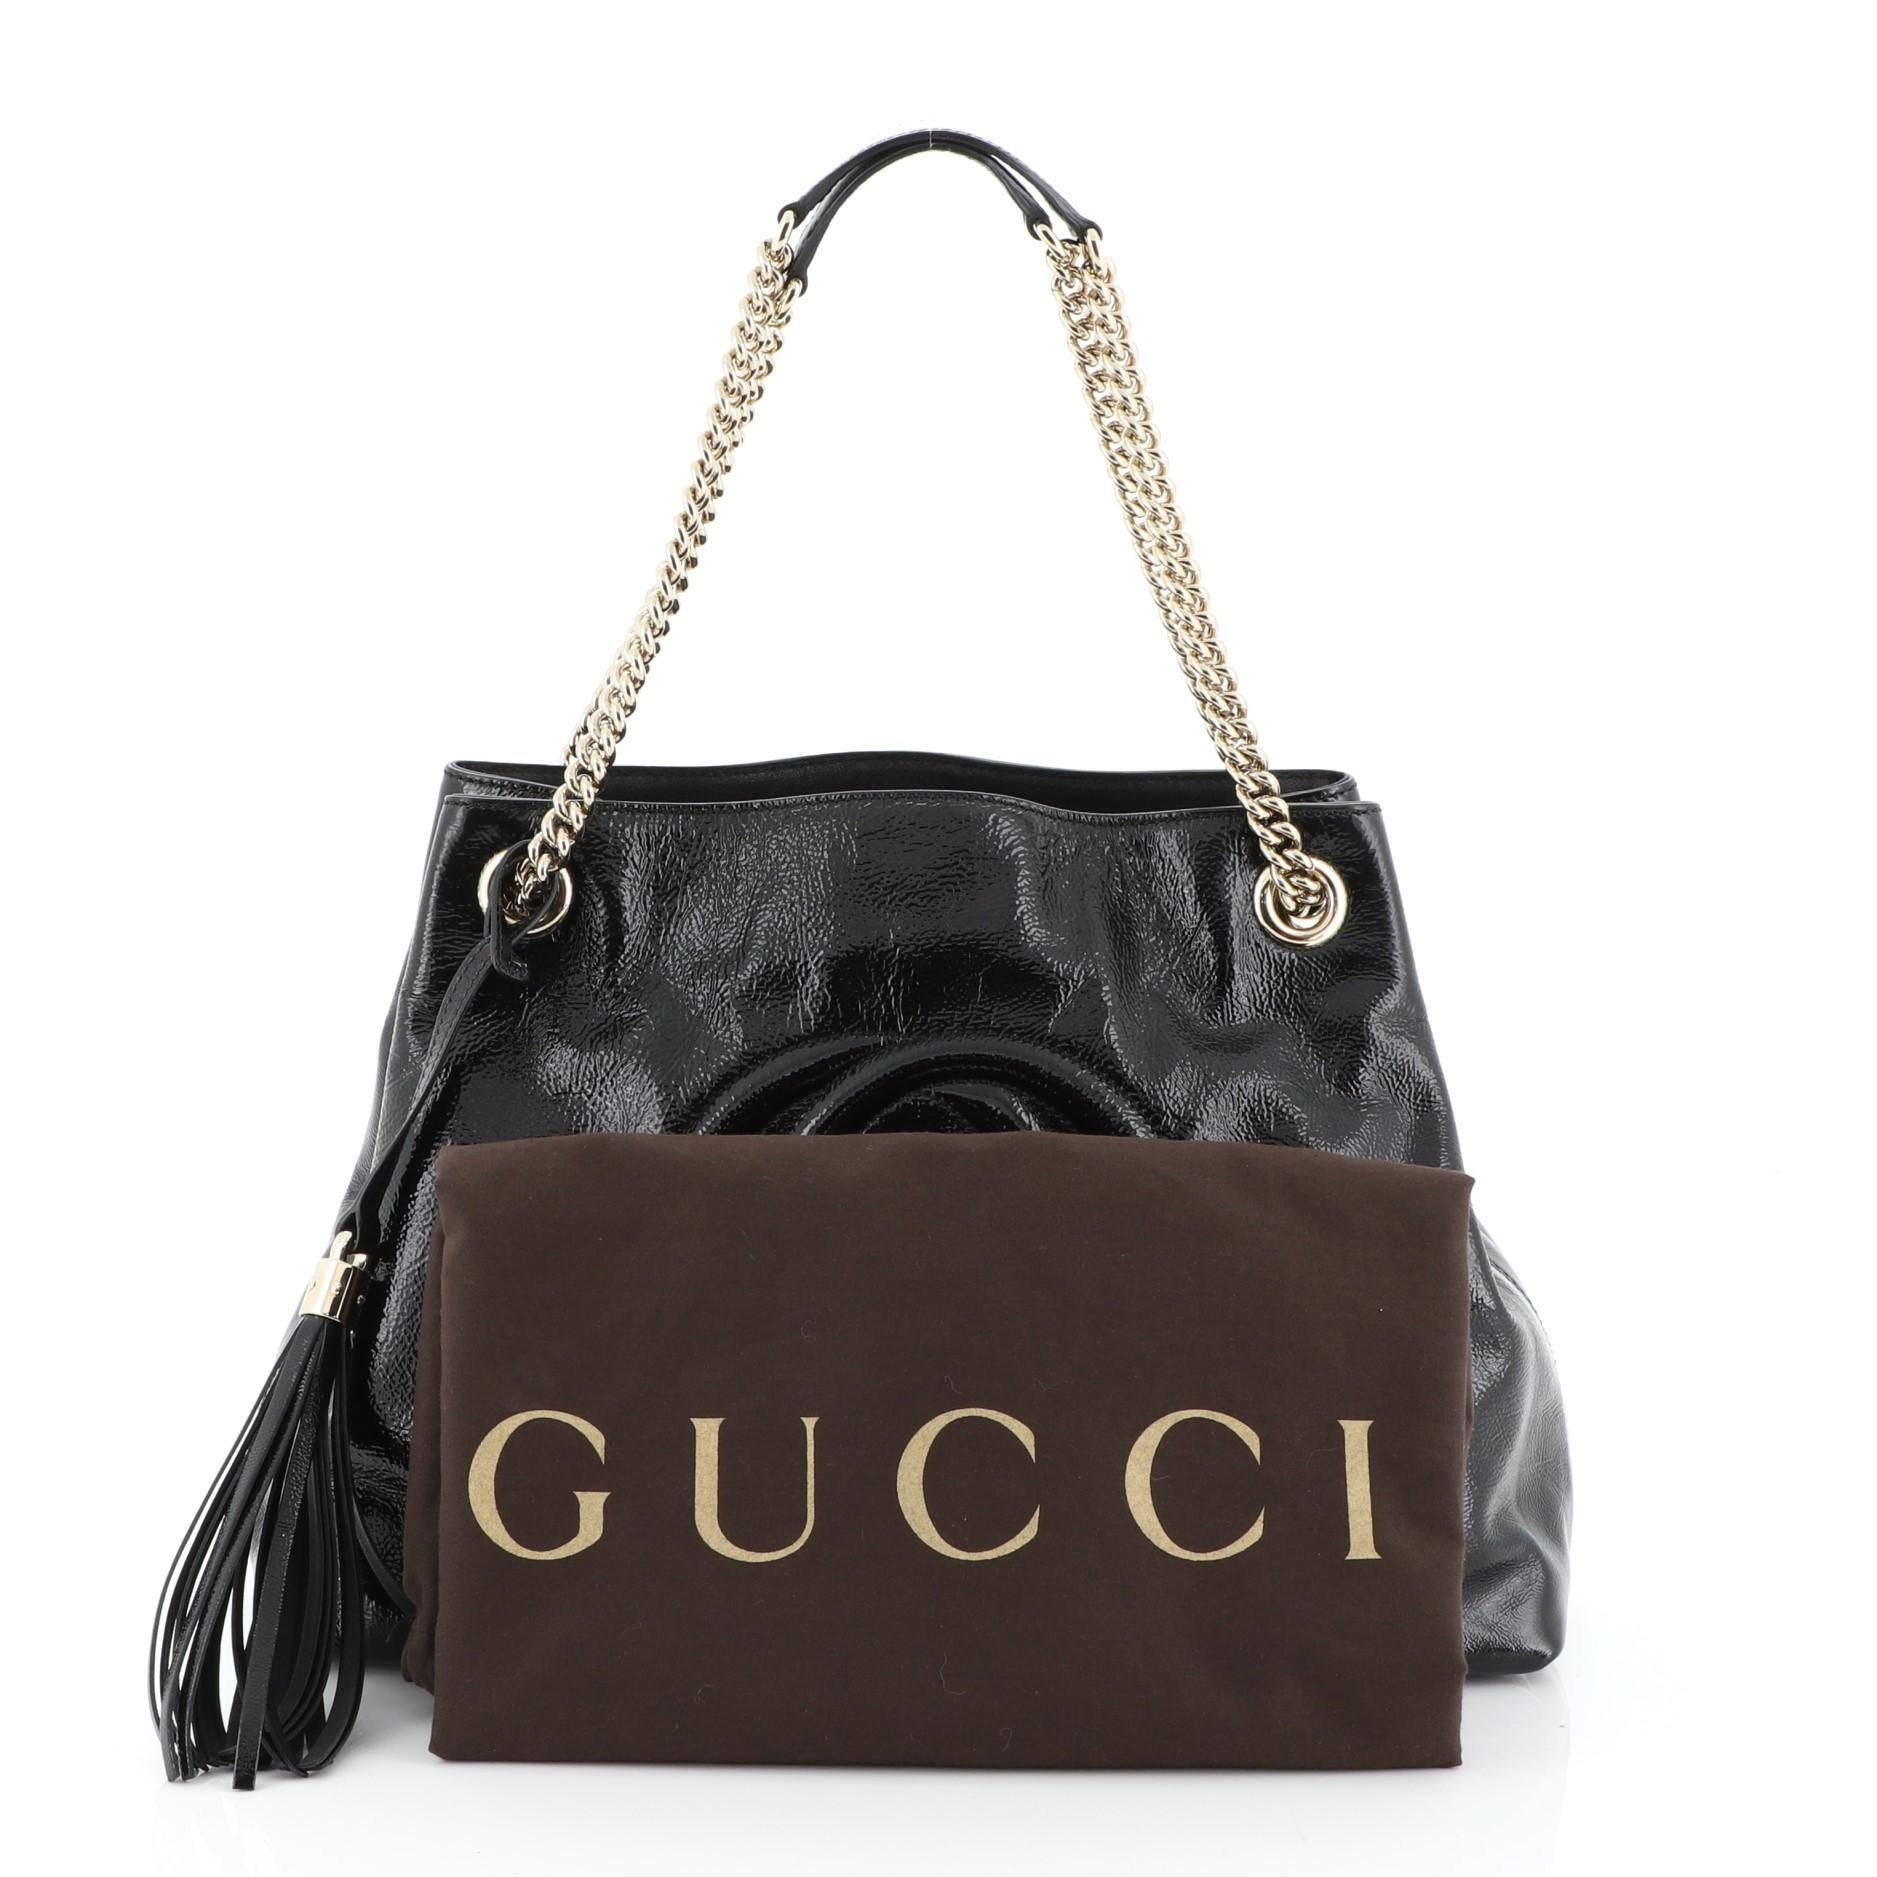 This Gucci Soho Chain Strap Shoulder Bag Patent Medium, crafted in black patent leather, features chain link straps with leather pads and gold-tone hardware. Its hook clasp closure opens to a neutral fabric interior with side zip and slip pockets.